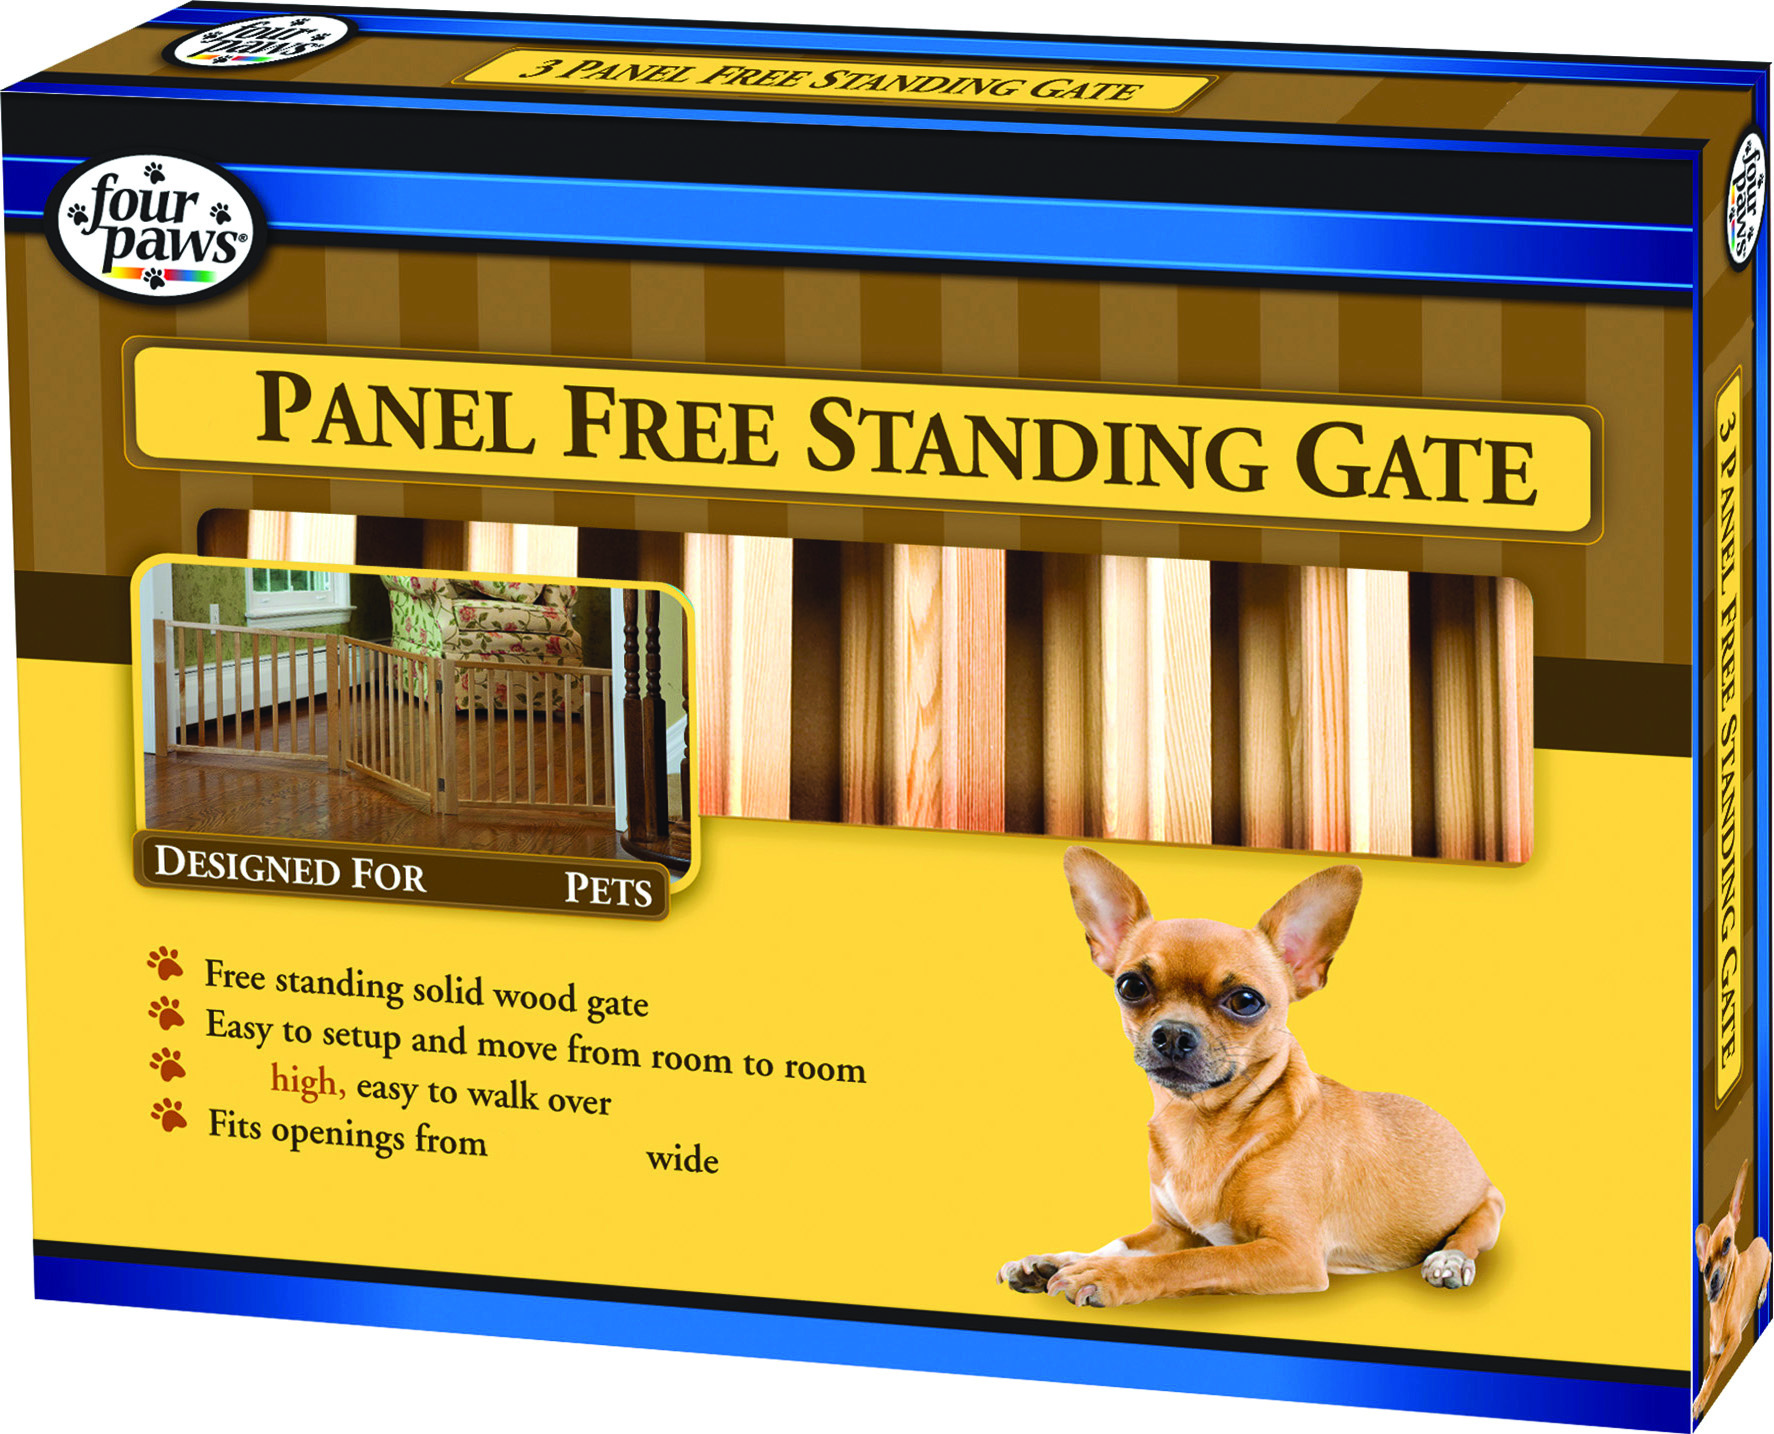 FREE STANDING WALK OVER GATE